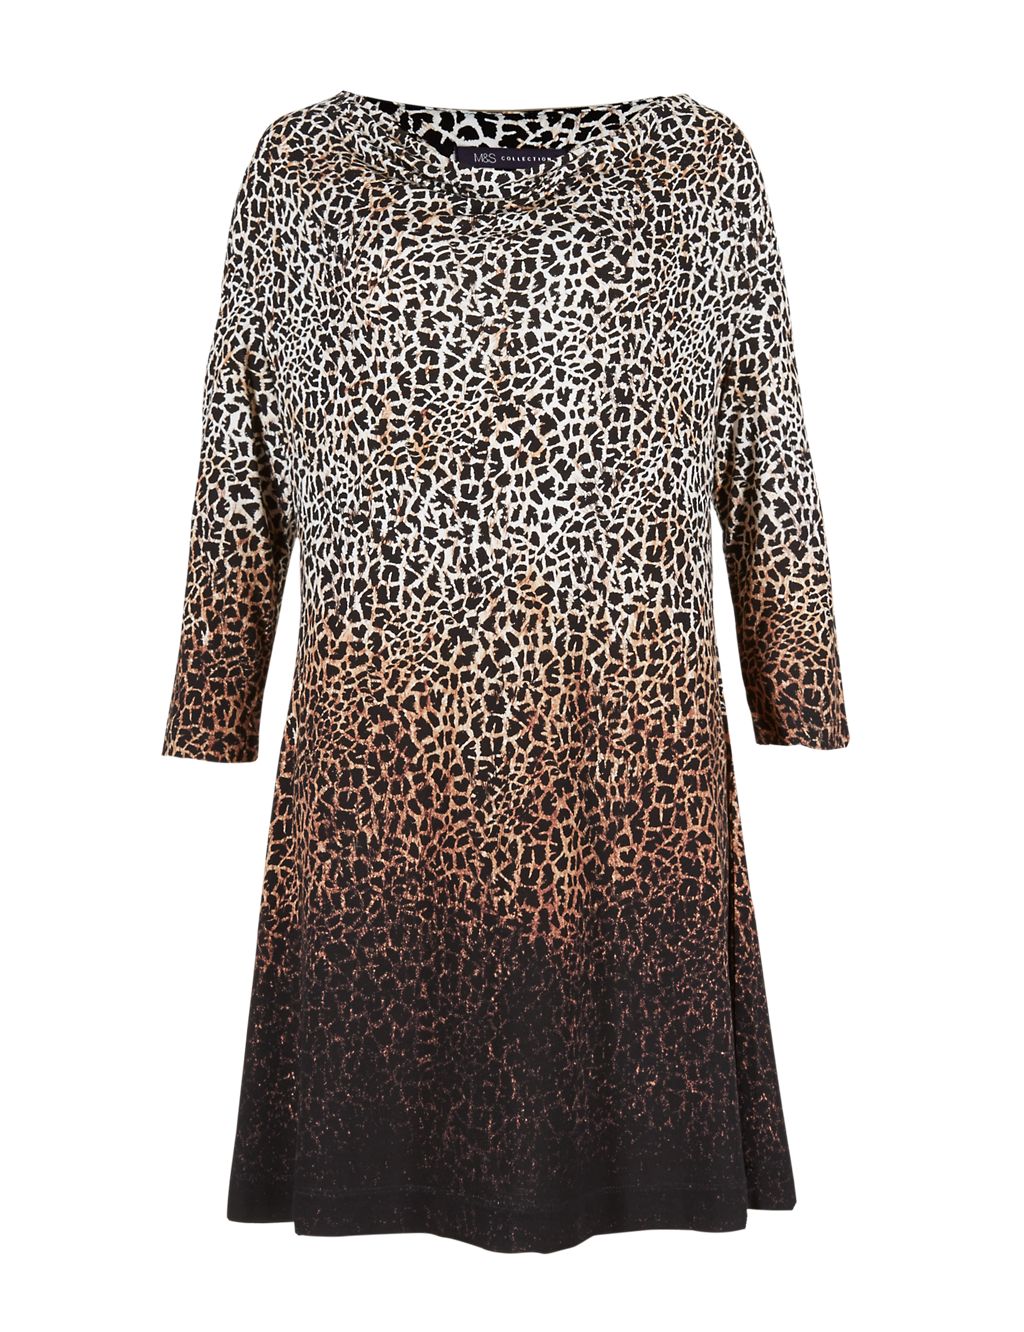 Ombre Animal Print Tunic 1 of 3